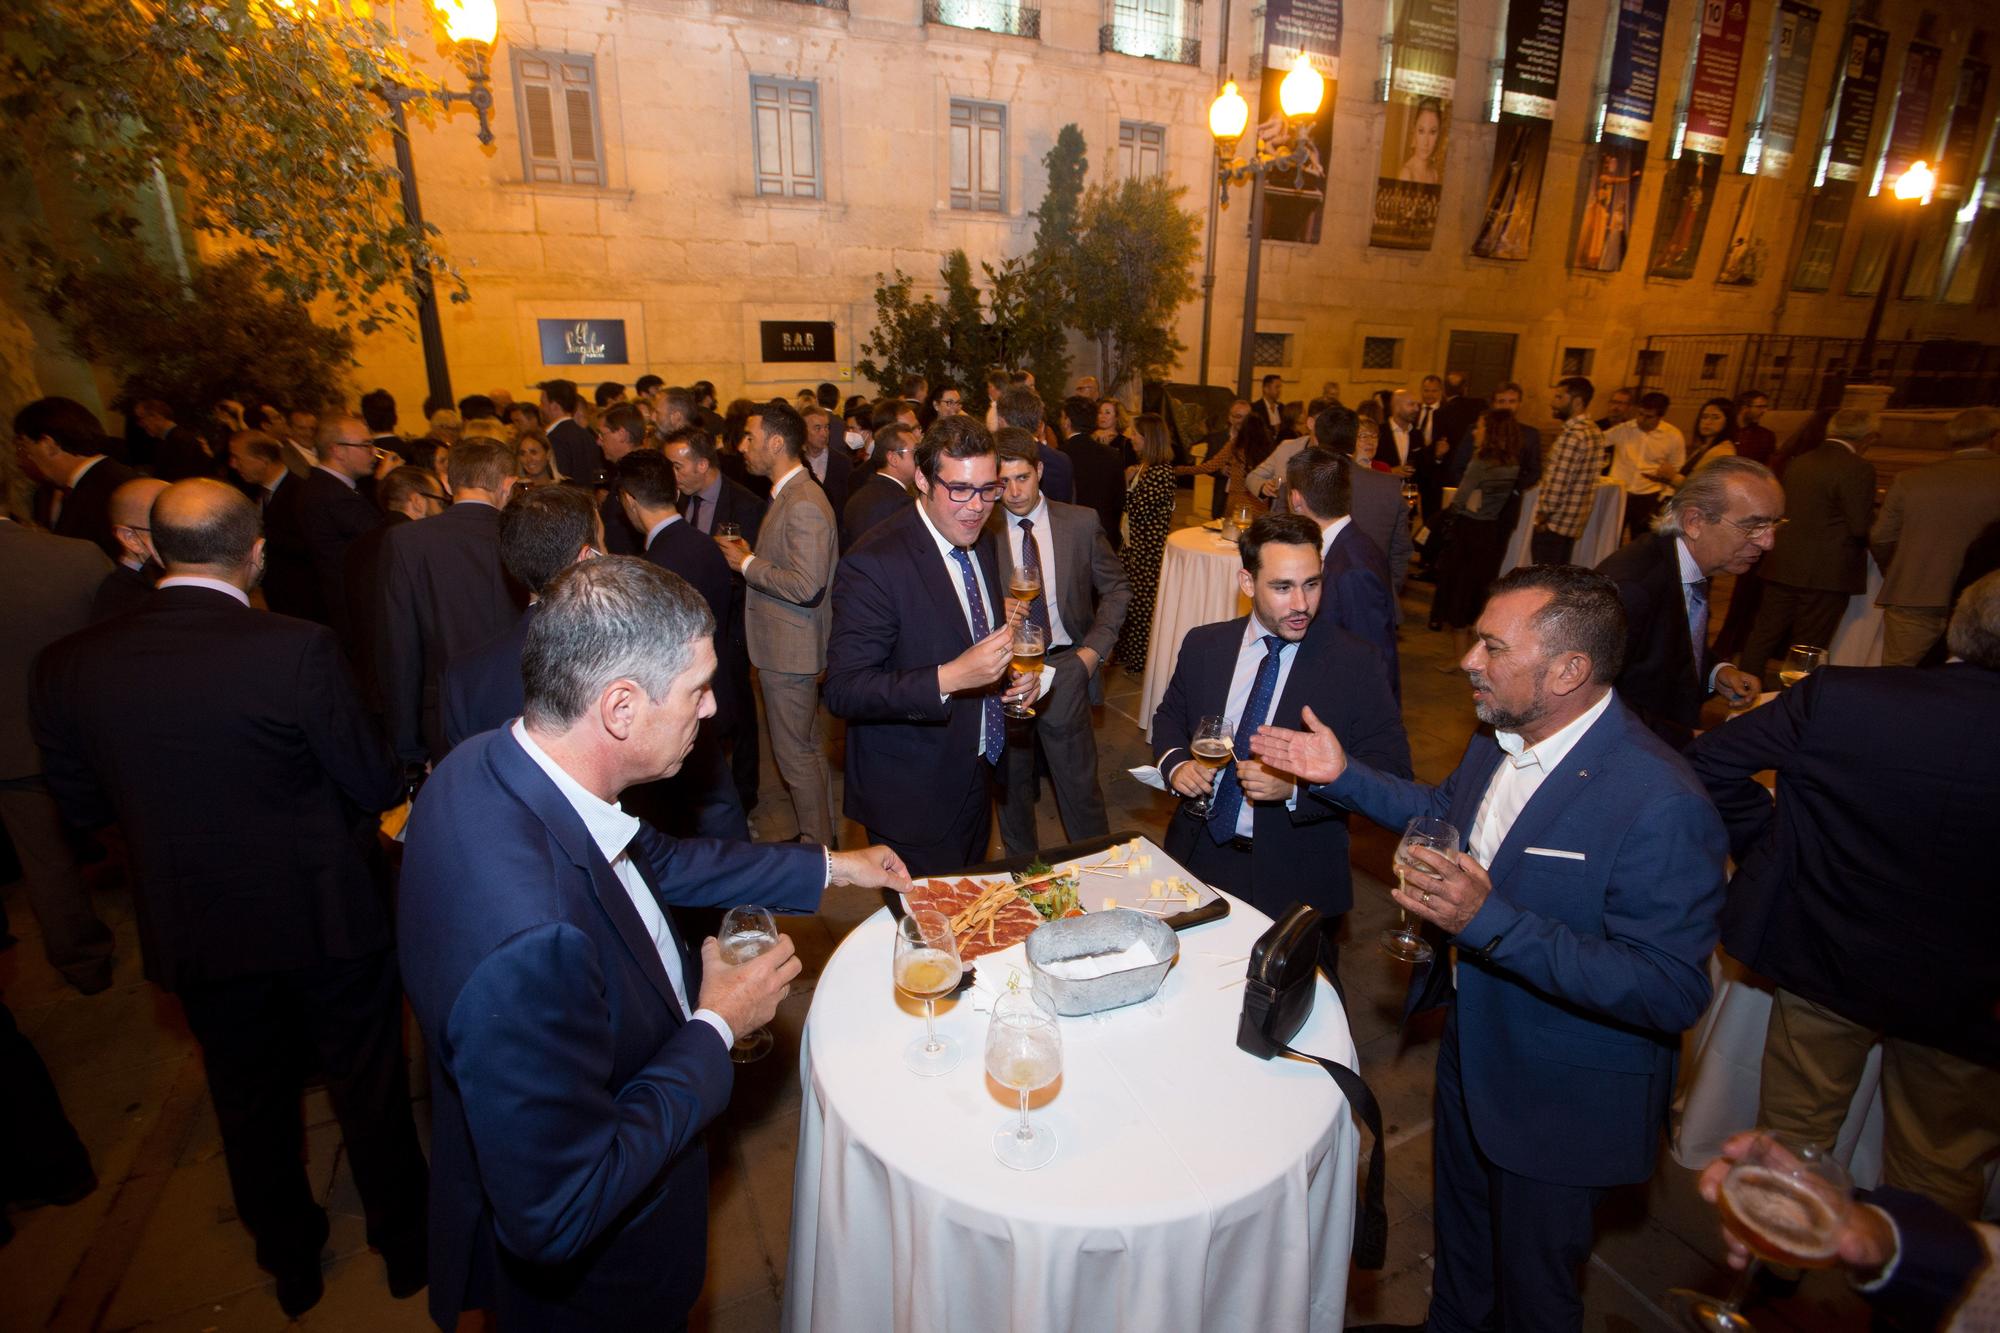 The Centennial Companies Gala in images